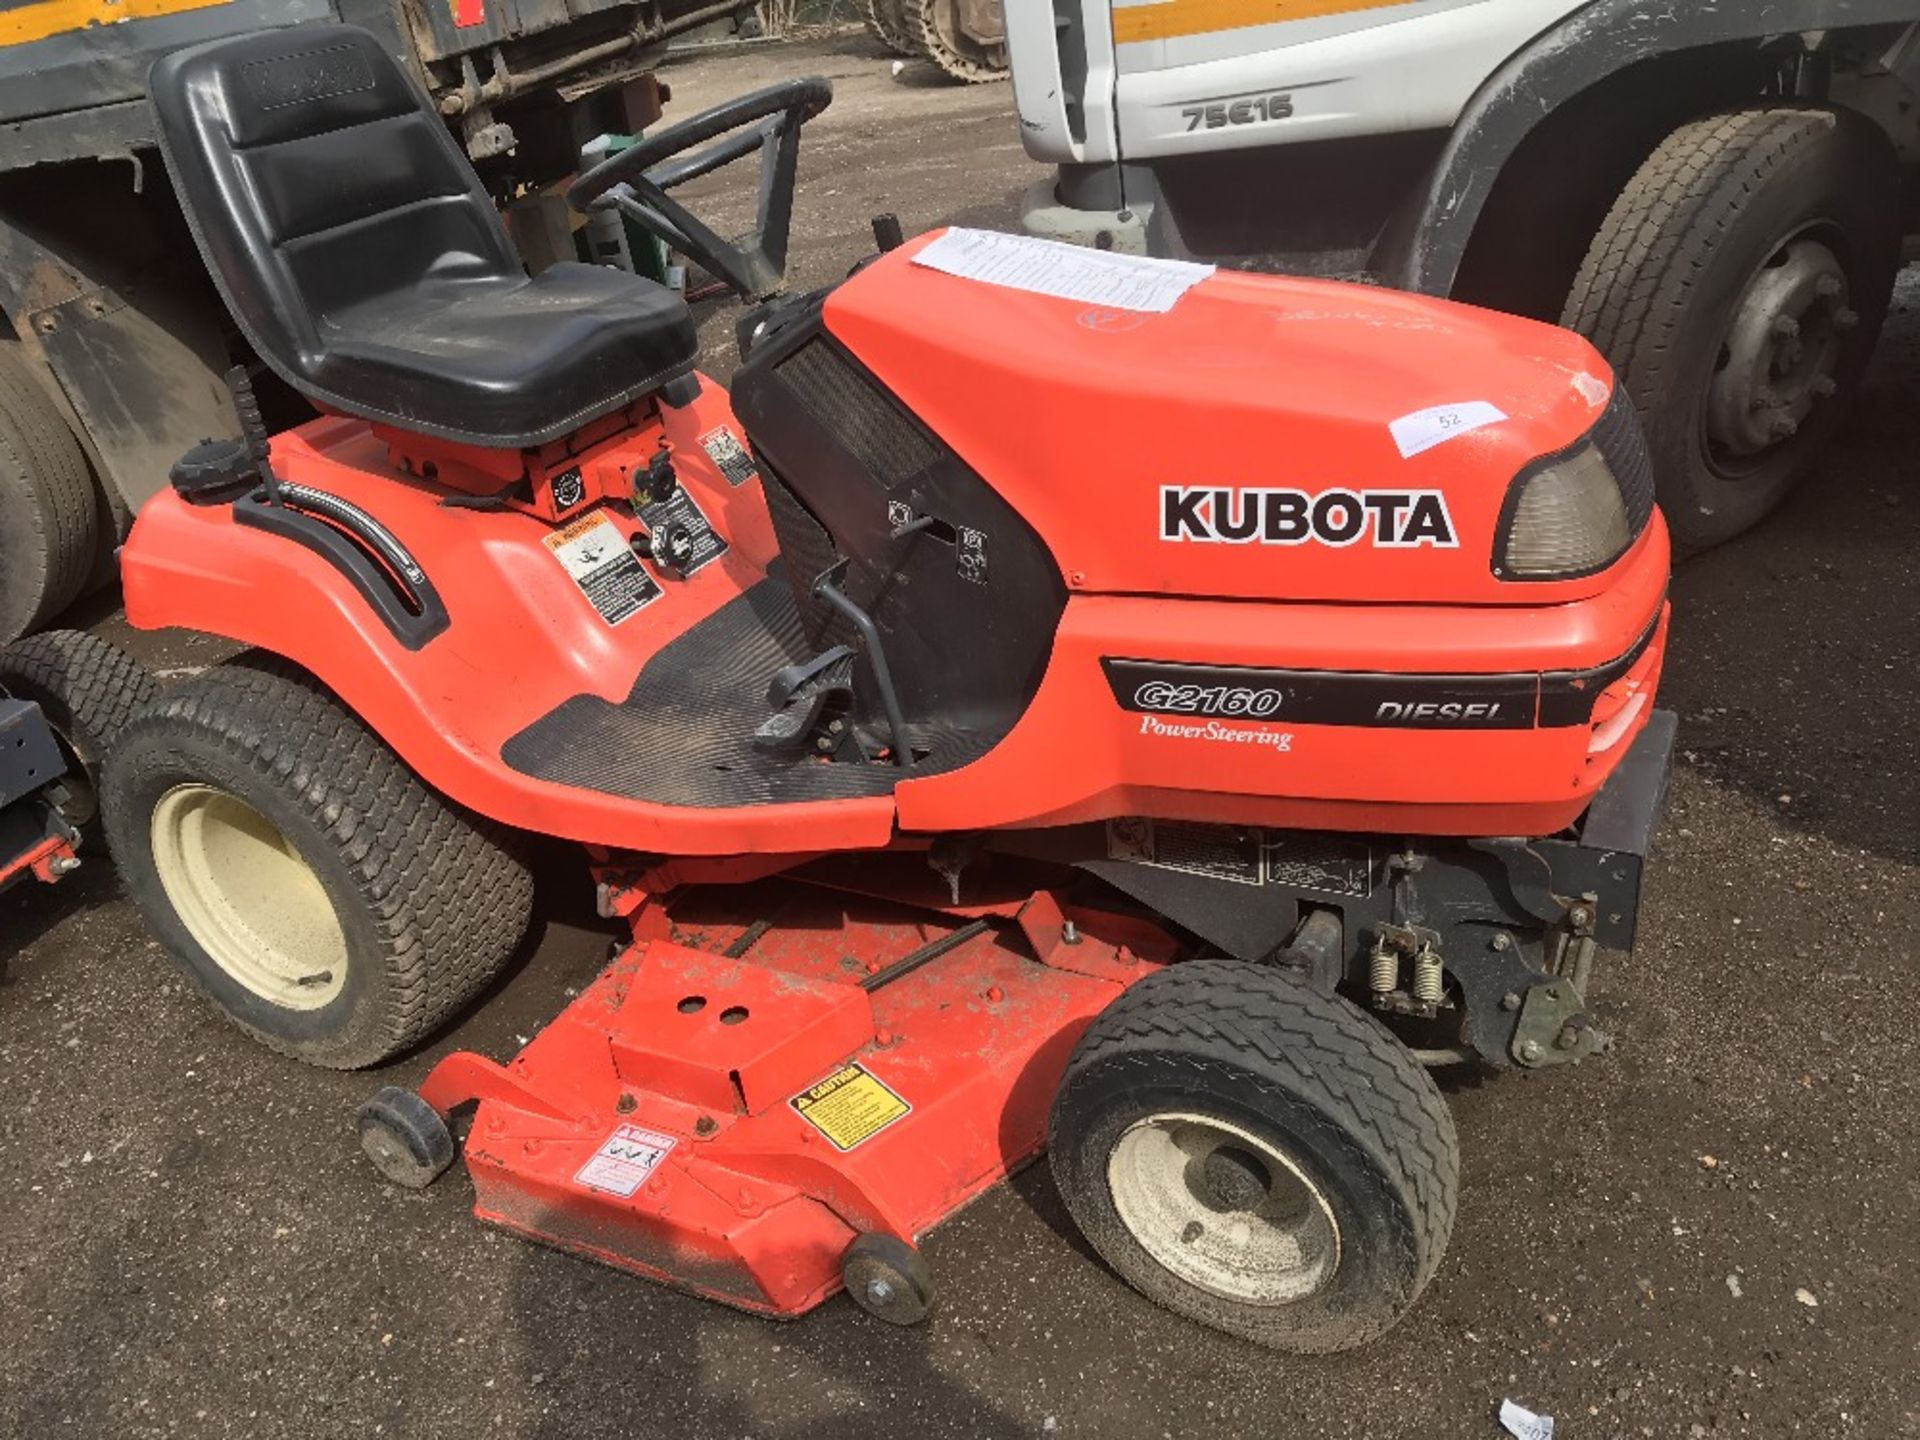 Kubota G2160 diesel mower tractor, reg. EU08 ORS SN: 12404 When tested was seen to run and drive